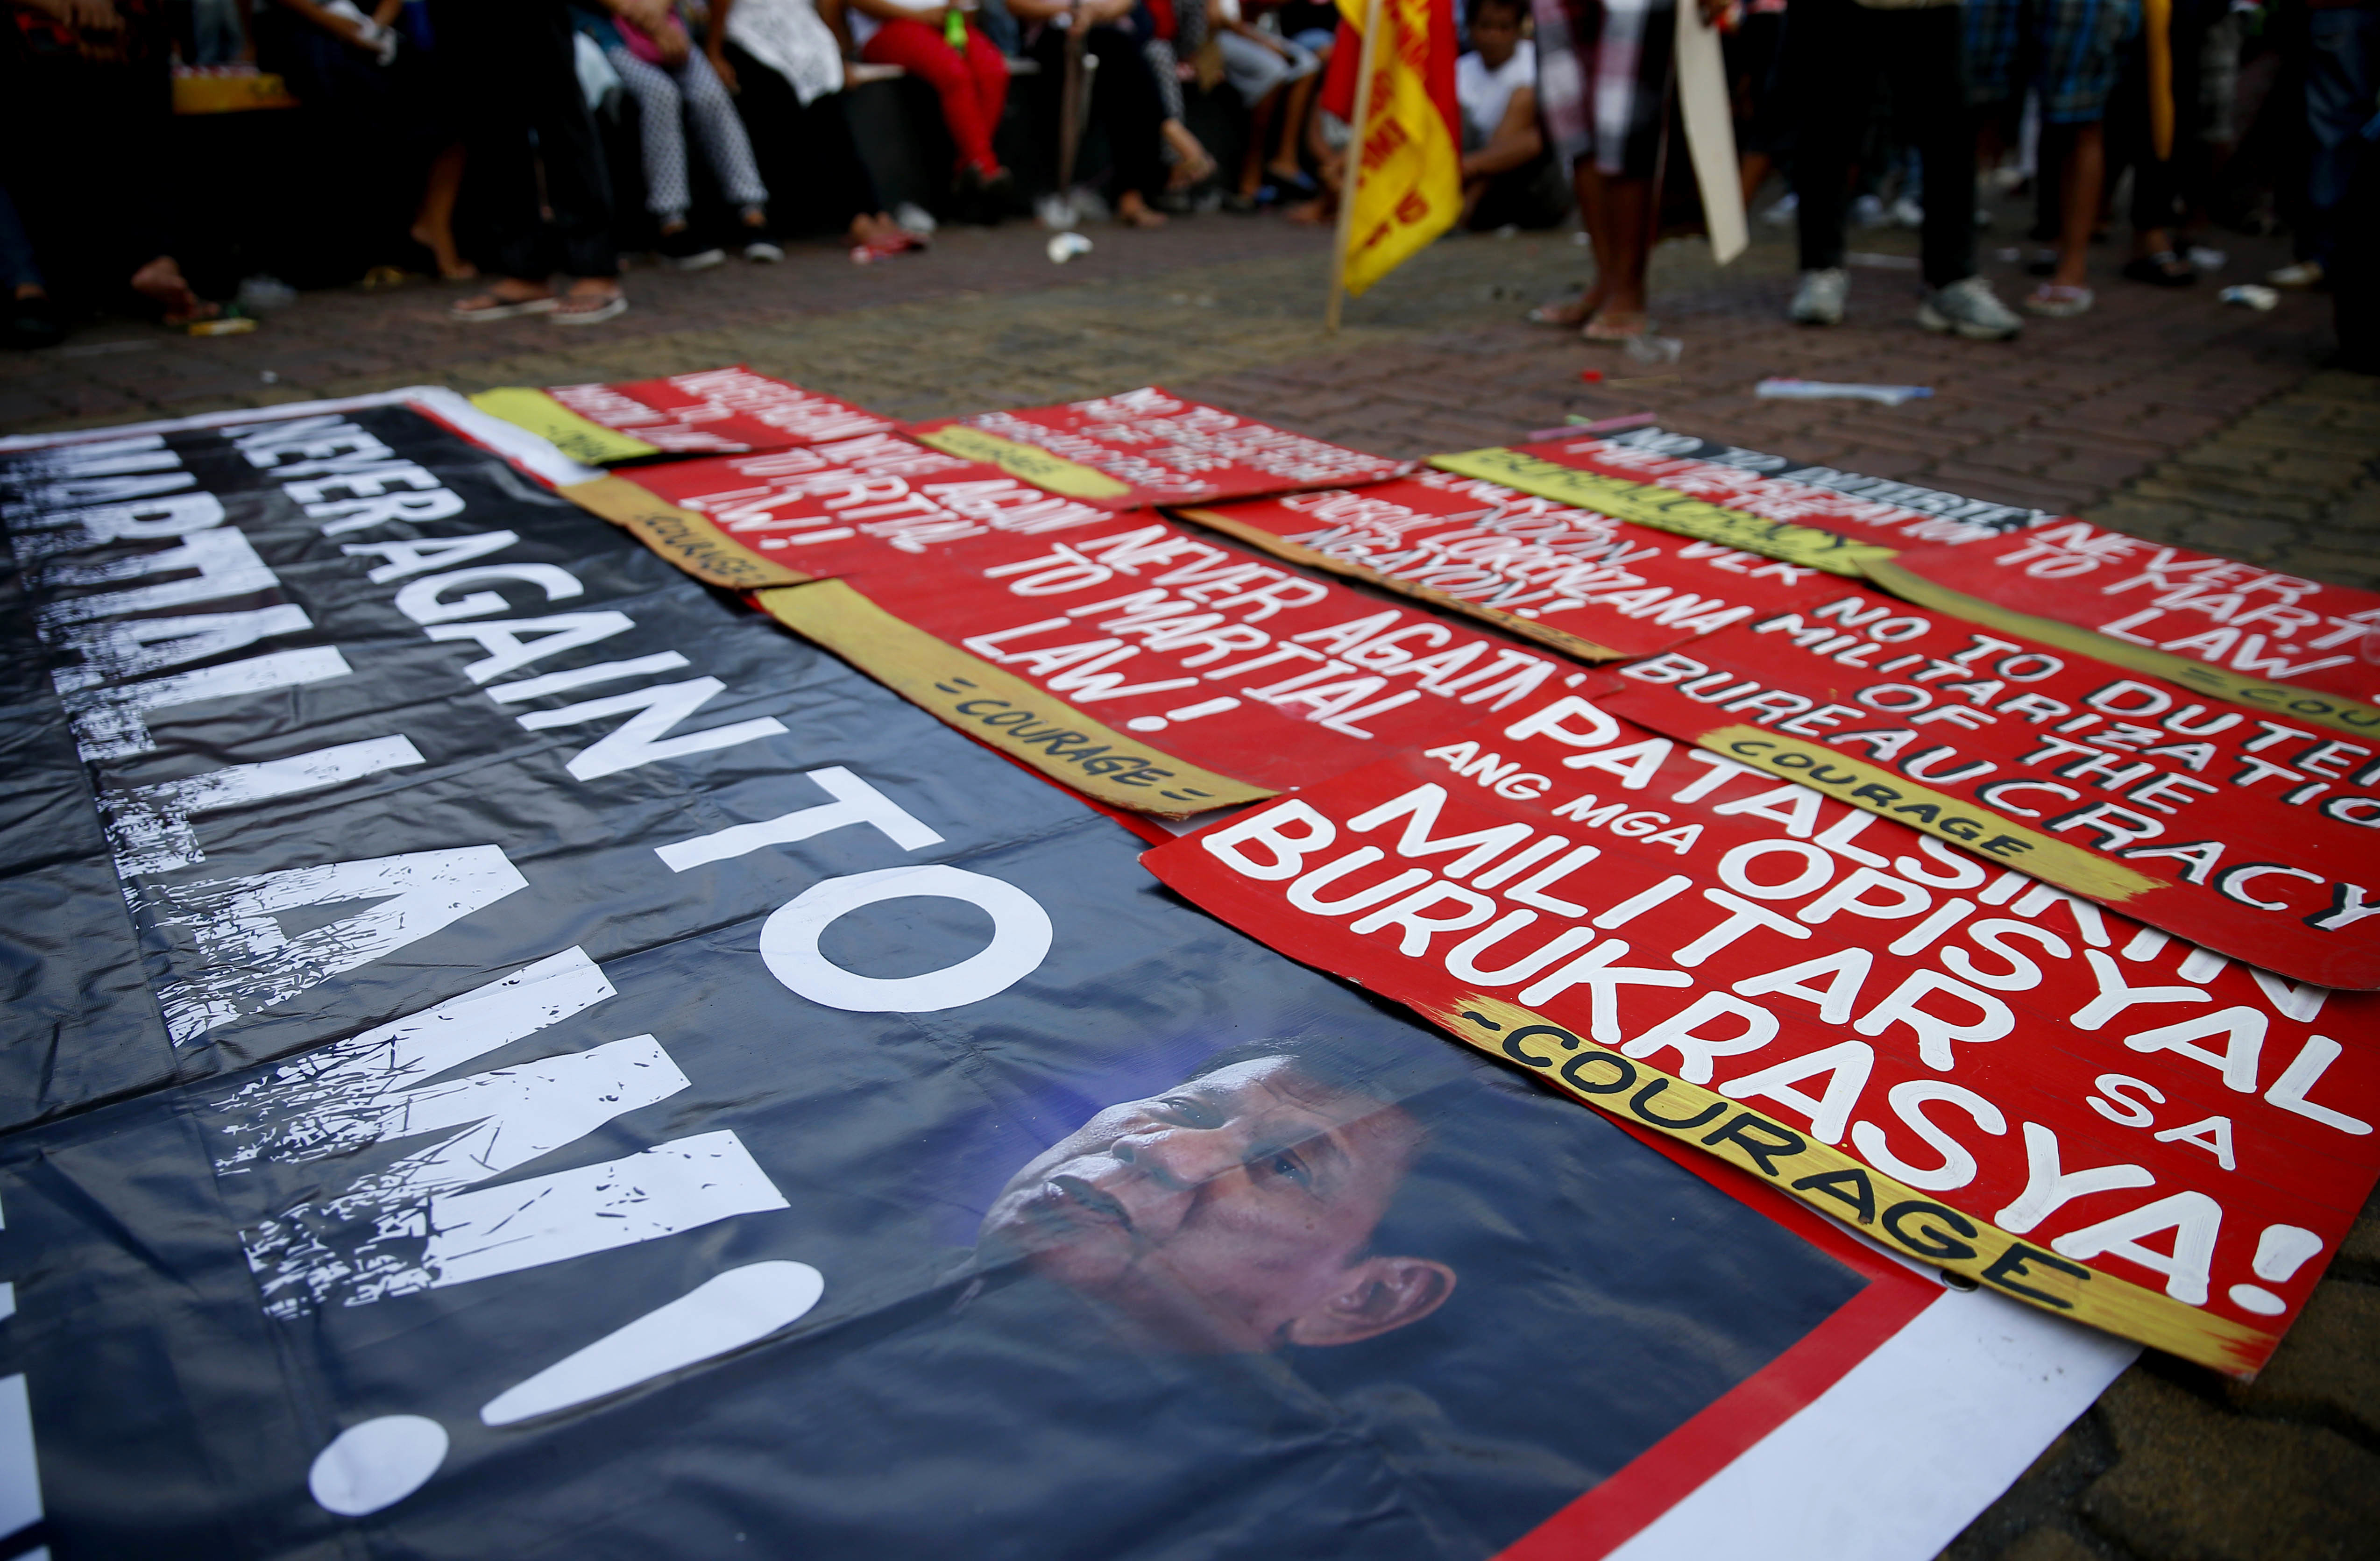 Protesters place a tarpaulin poster bearing a photo of Philippine President Rodrigo Duterte and placards with their messages on the pavement during a rally near the Presidential Palace to denounce the Martial Law declaration by Duterte after Muslim militants laid a siege of Marawi city in southern Philippines for three weeks, Monday, June 12, 2017 in Manila, Philippines. The protesters also denounced the killings by Duterte's bloody anti-drug crackdown. (AP Photo/Bullit Marquez)